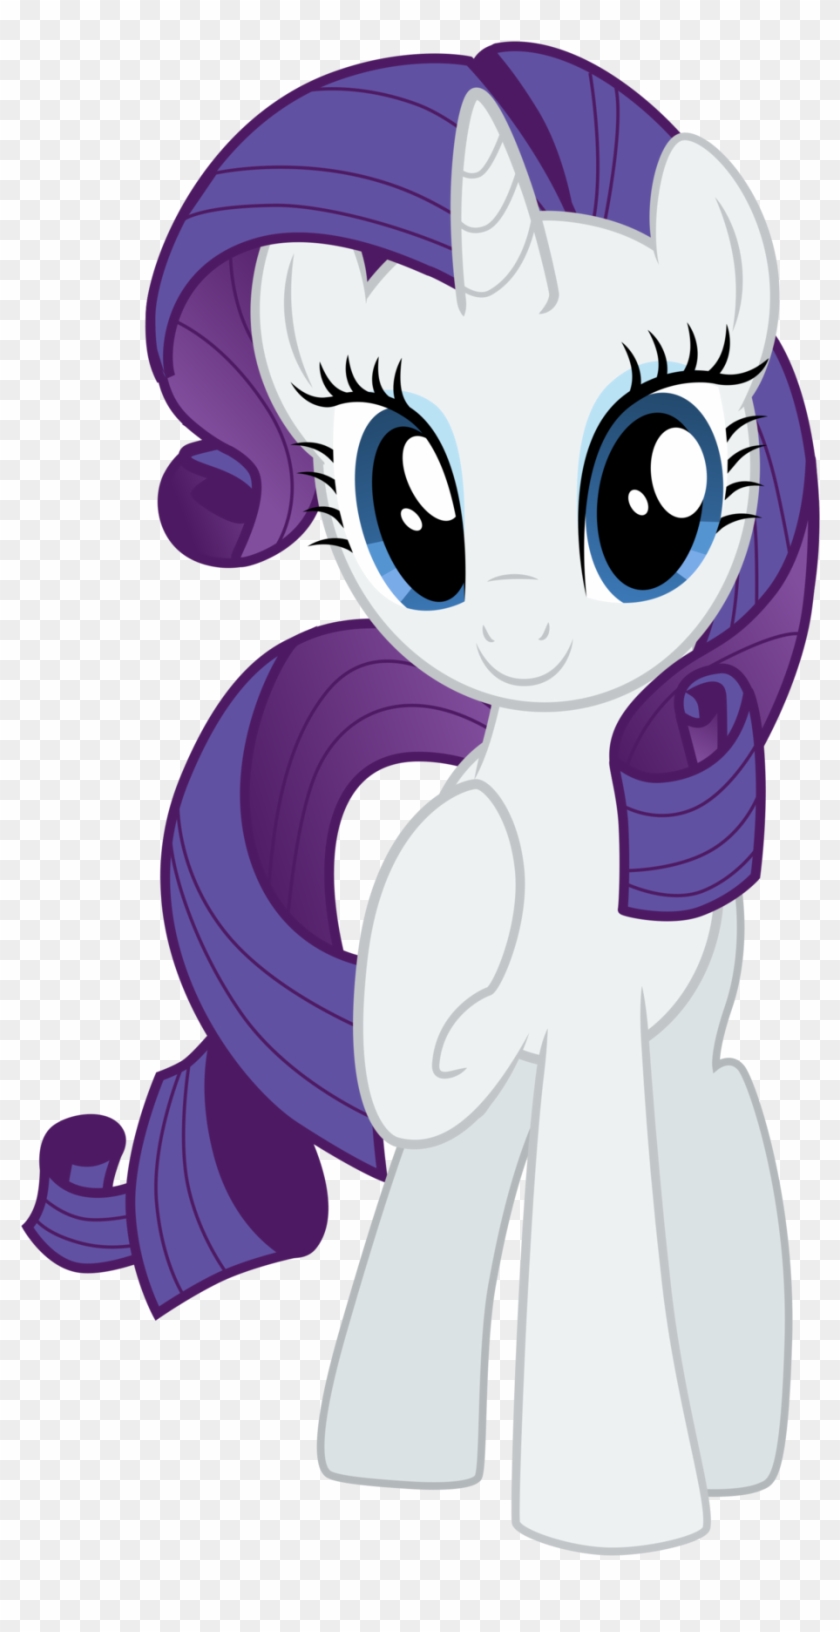 Rarity Image Result For Mlp Rarity - My Little Pony: Friendship Is Magic #761516